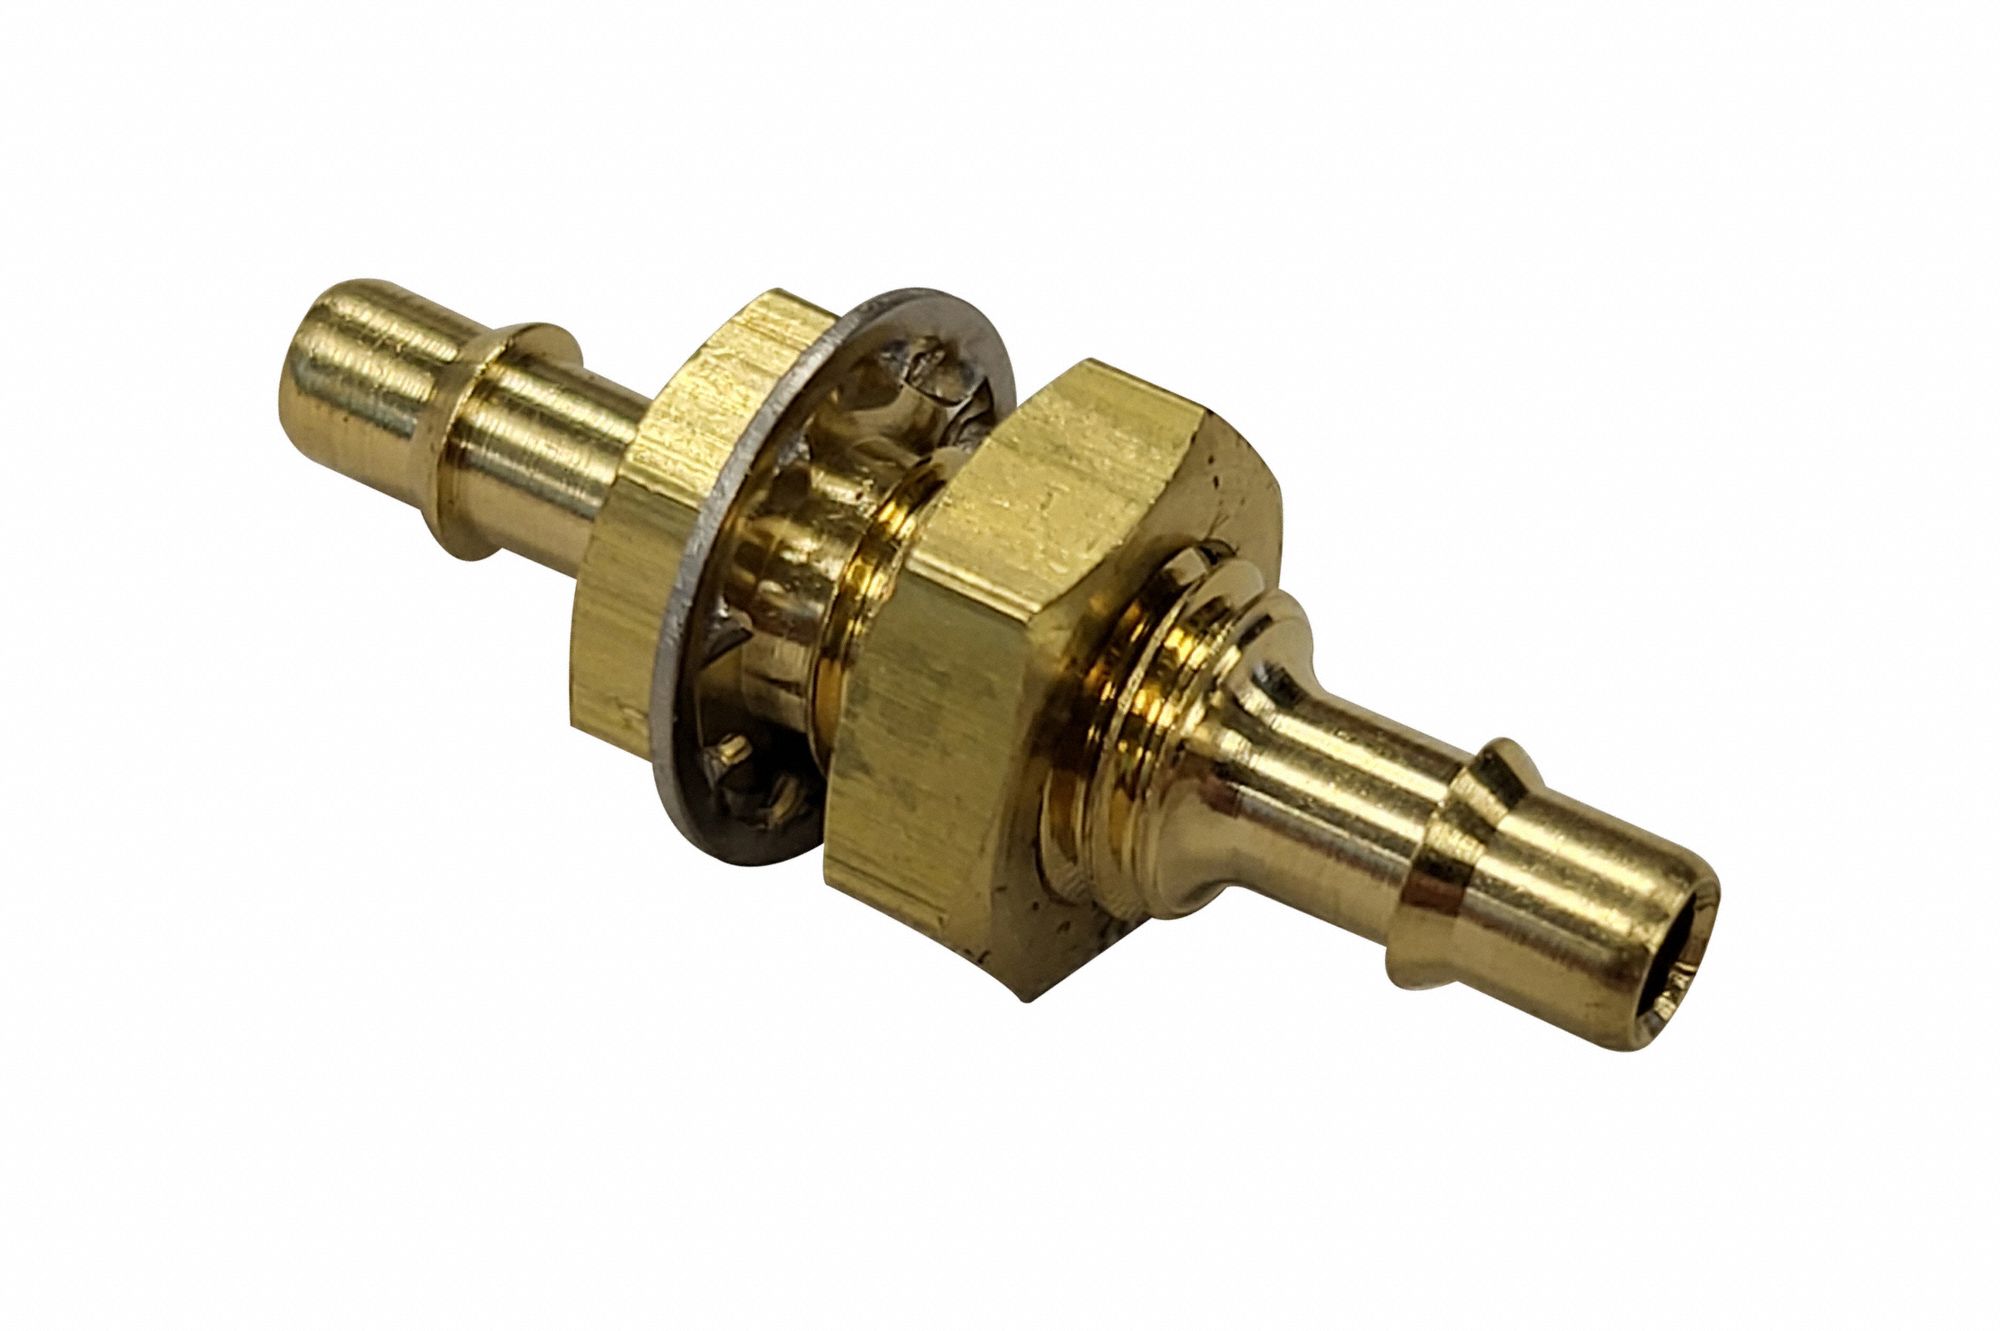 MINI BARB FITTING: Nickel-Plated Brass, Barbed x Barbed, For 1/4 in x 1/4  in Tube ID, Beaded Barb